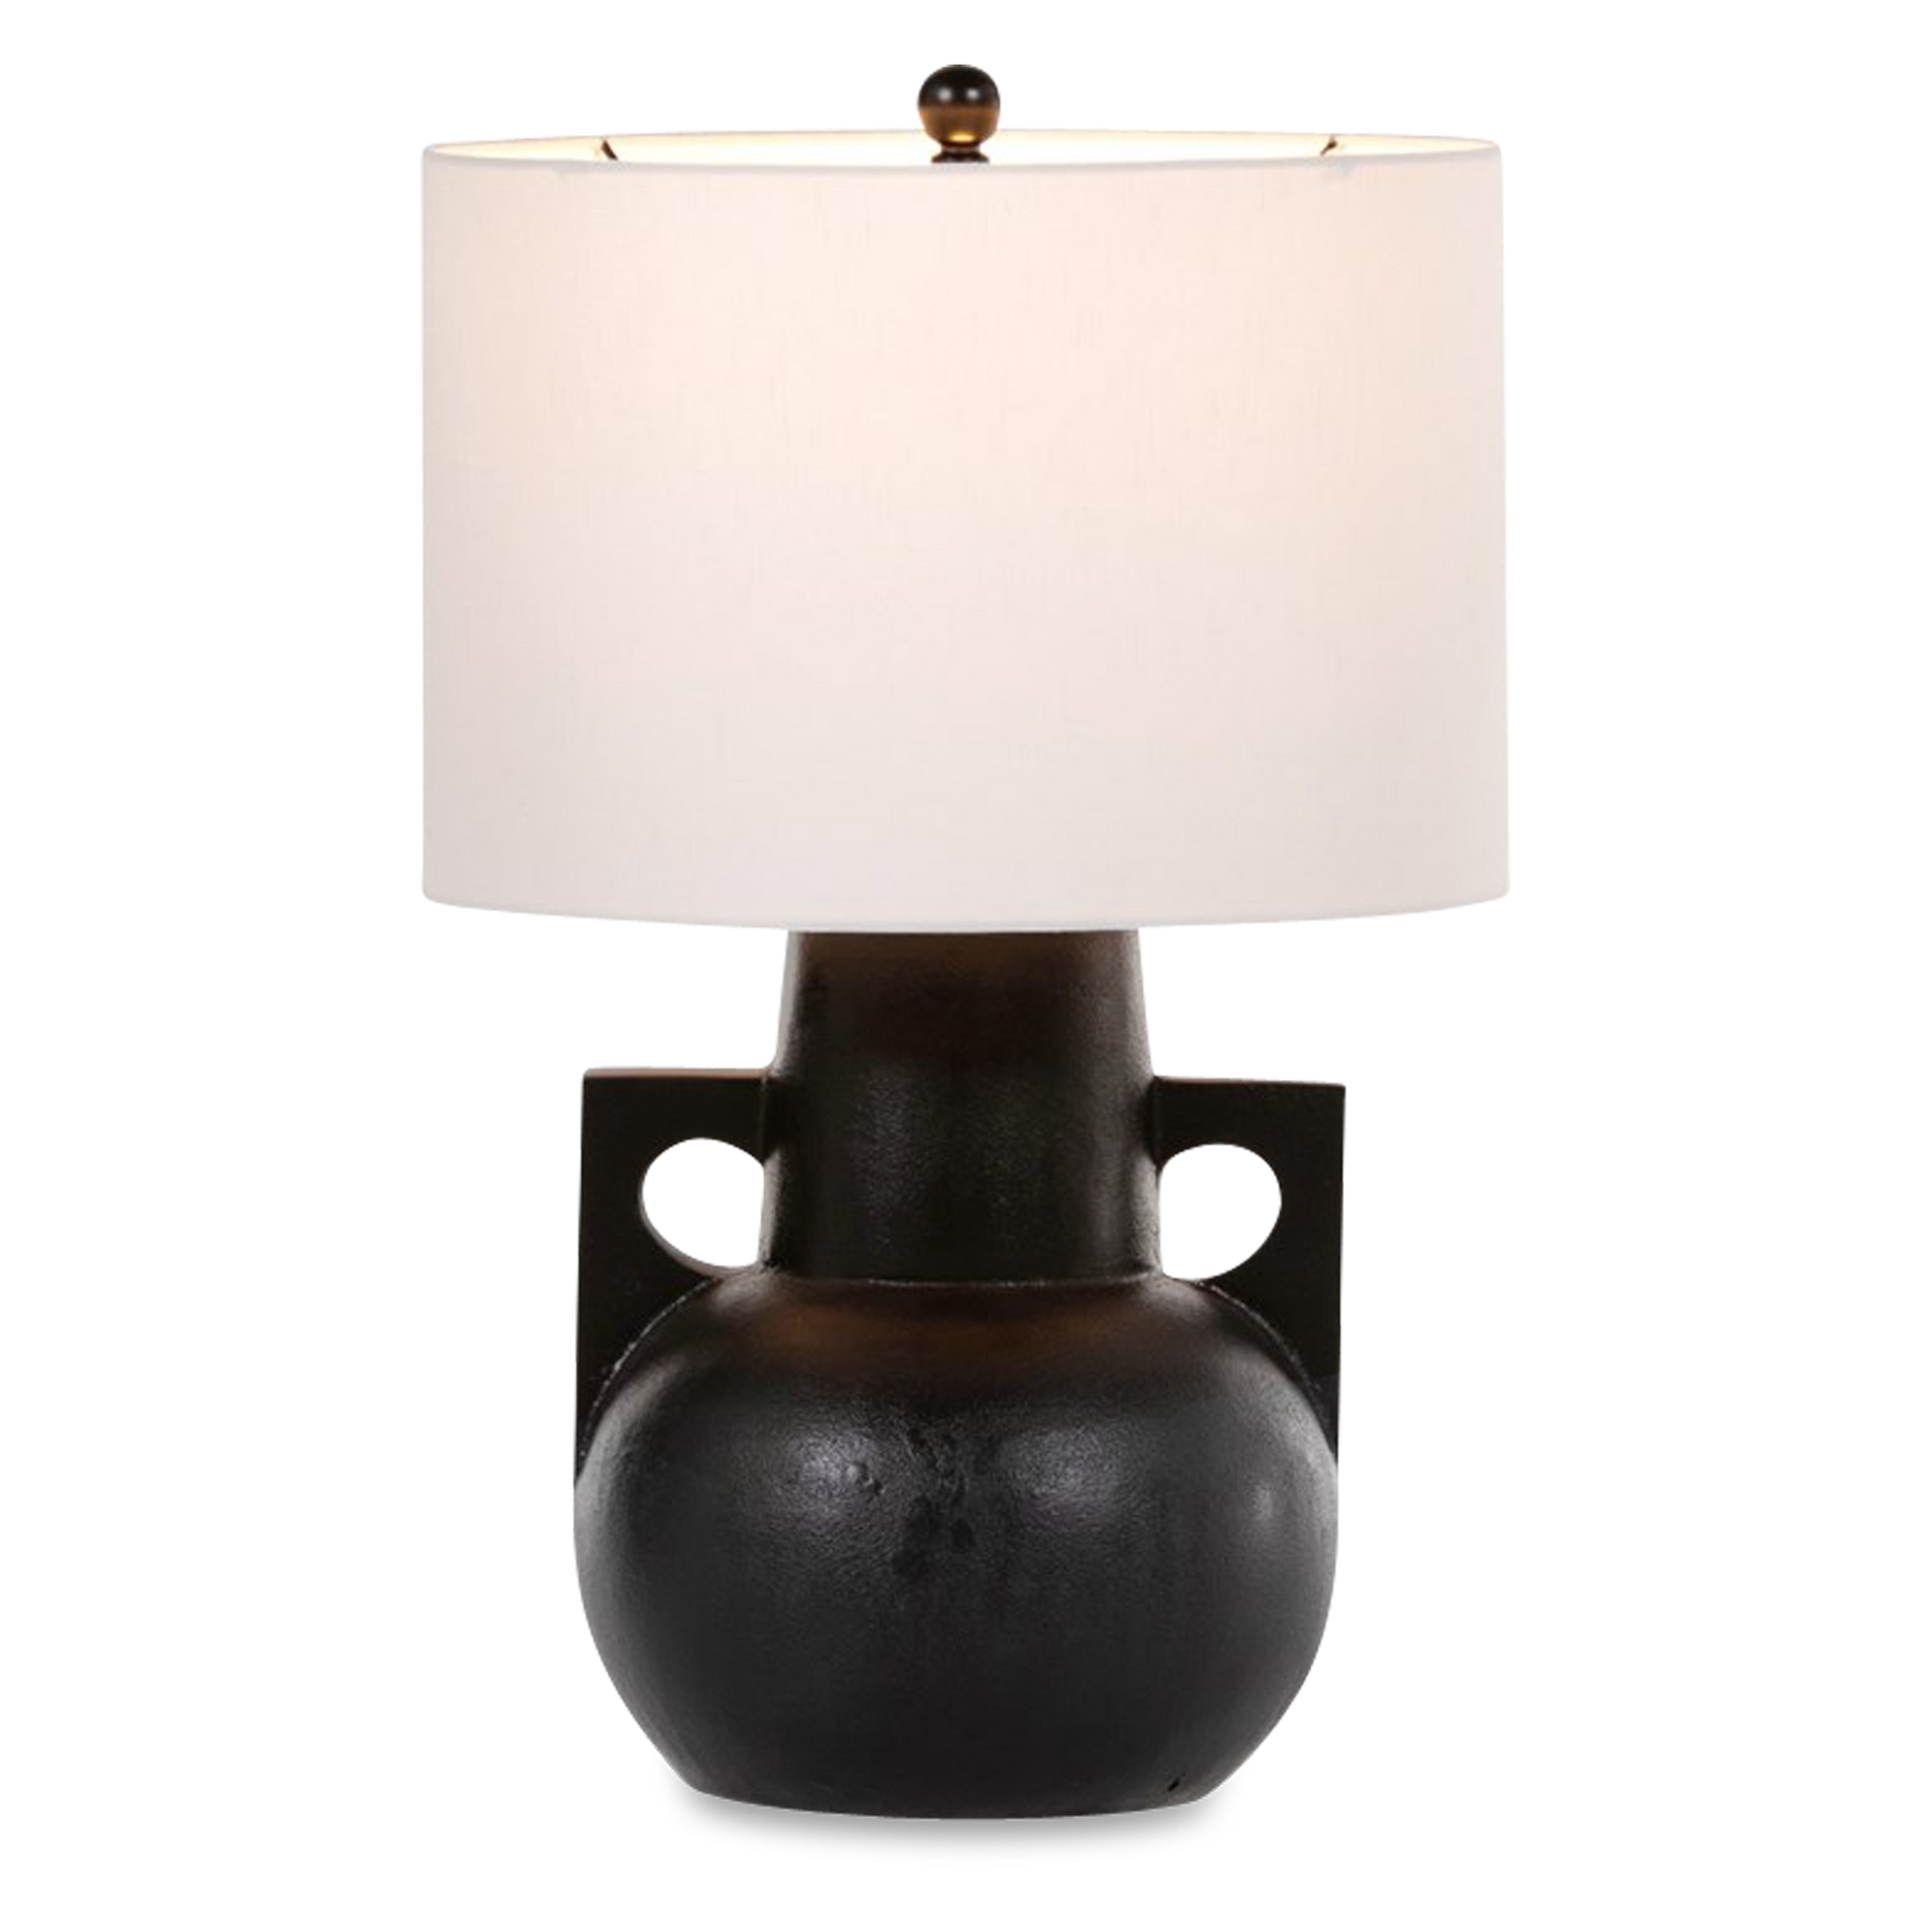 The Asher Table Lamp is finished in a modern matte black, cast aluminum forms a unique, shapely base, topped by a white cotton shade for contrast.